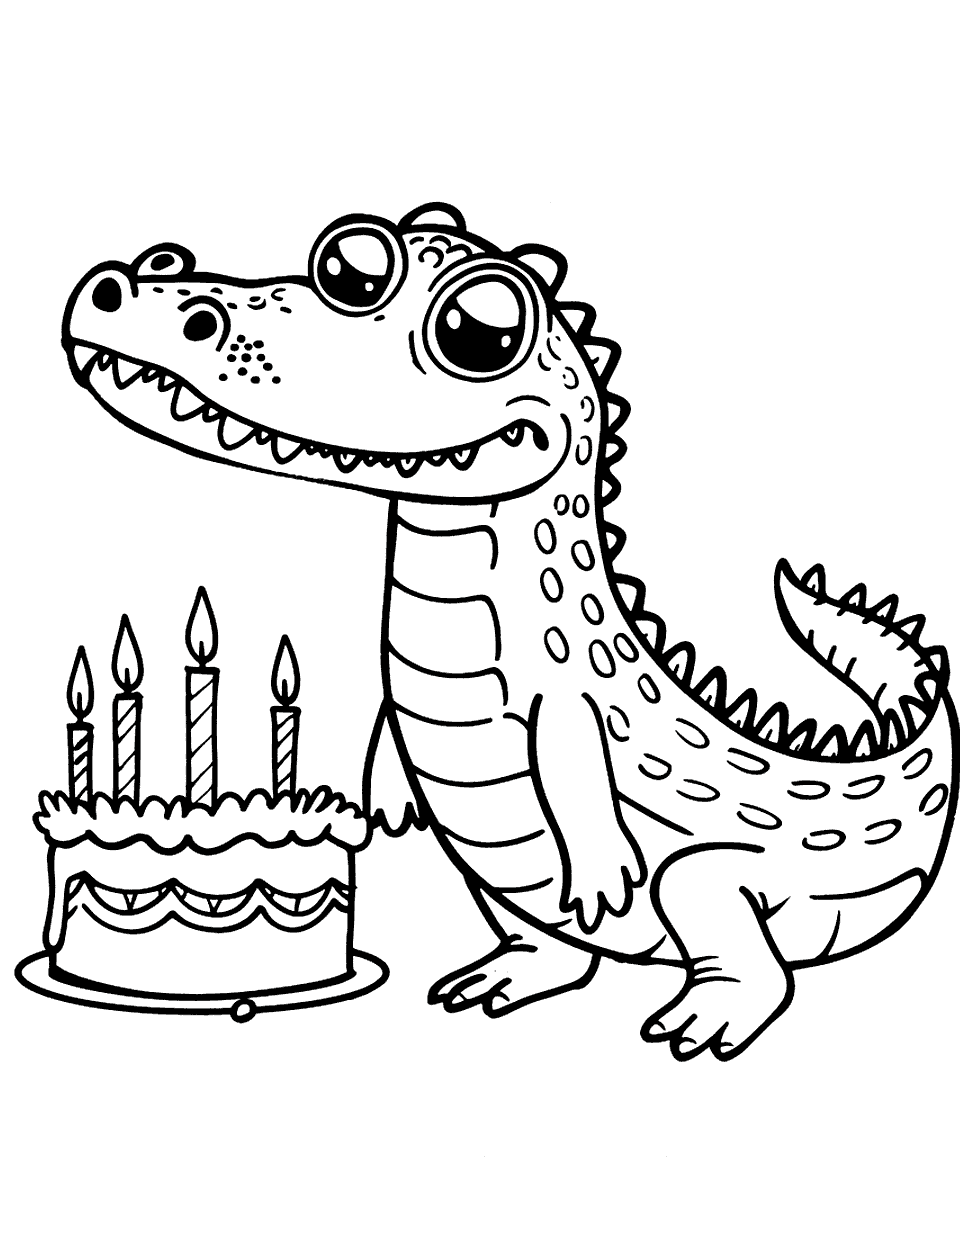 Alligator with a Birthday Cake Coloring Page - An alligator standing next to a birthday cake with candles.